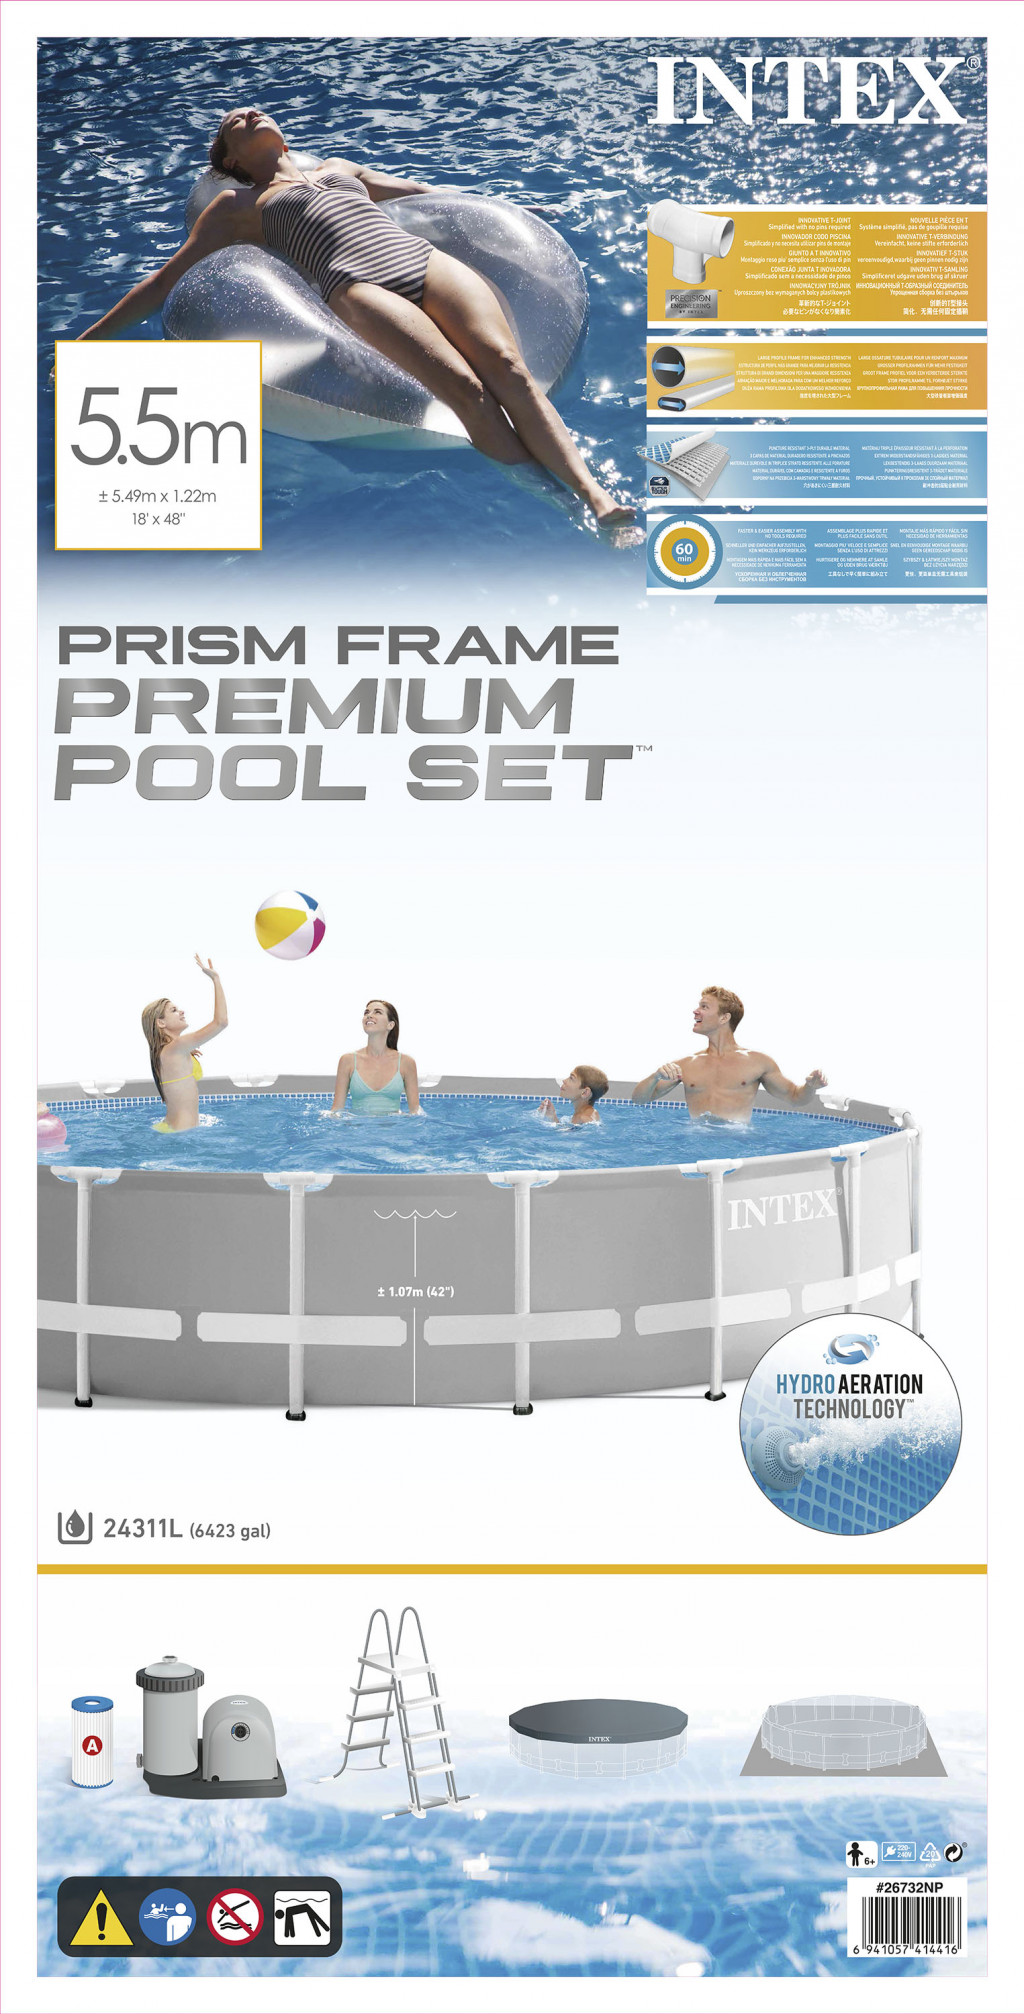 Intex Prism Frame Premium Pool Set withFilter Pump, Safety Ladder, Ground Cloth, Cover Grey, Age 6+, 549x122 cm